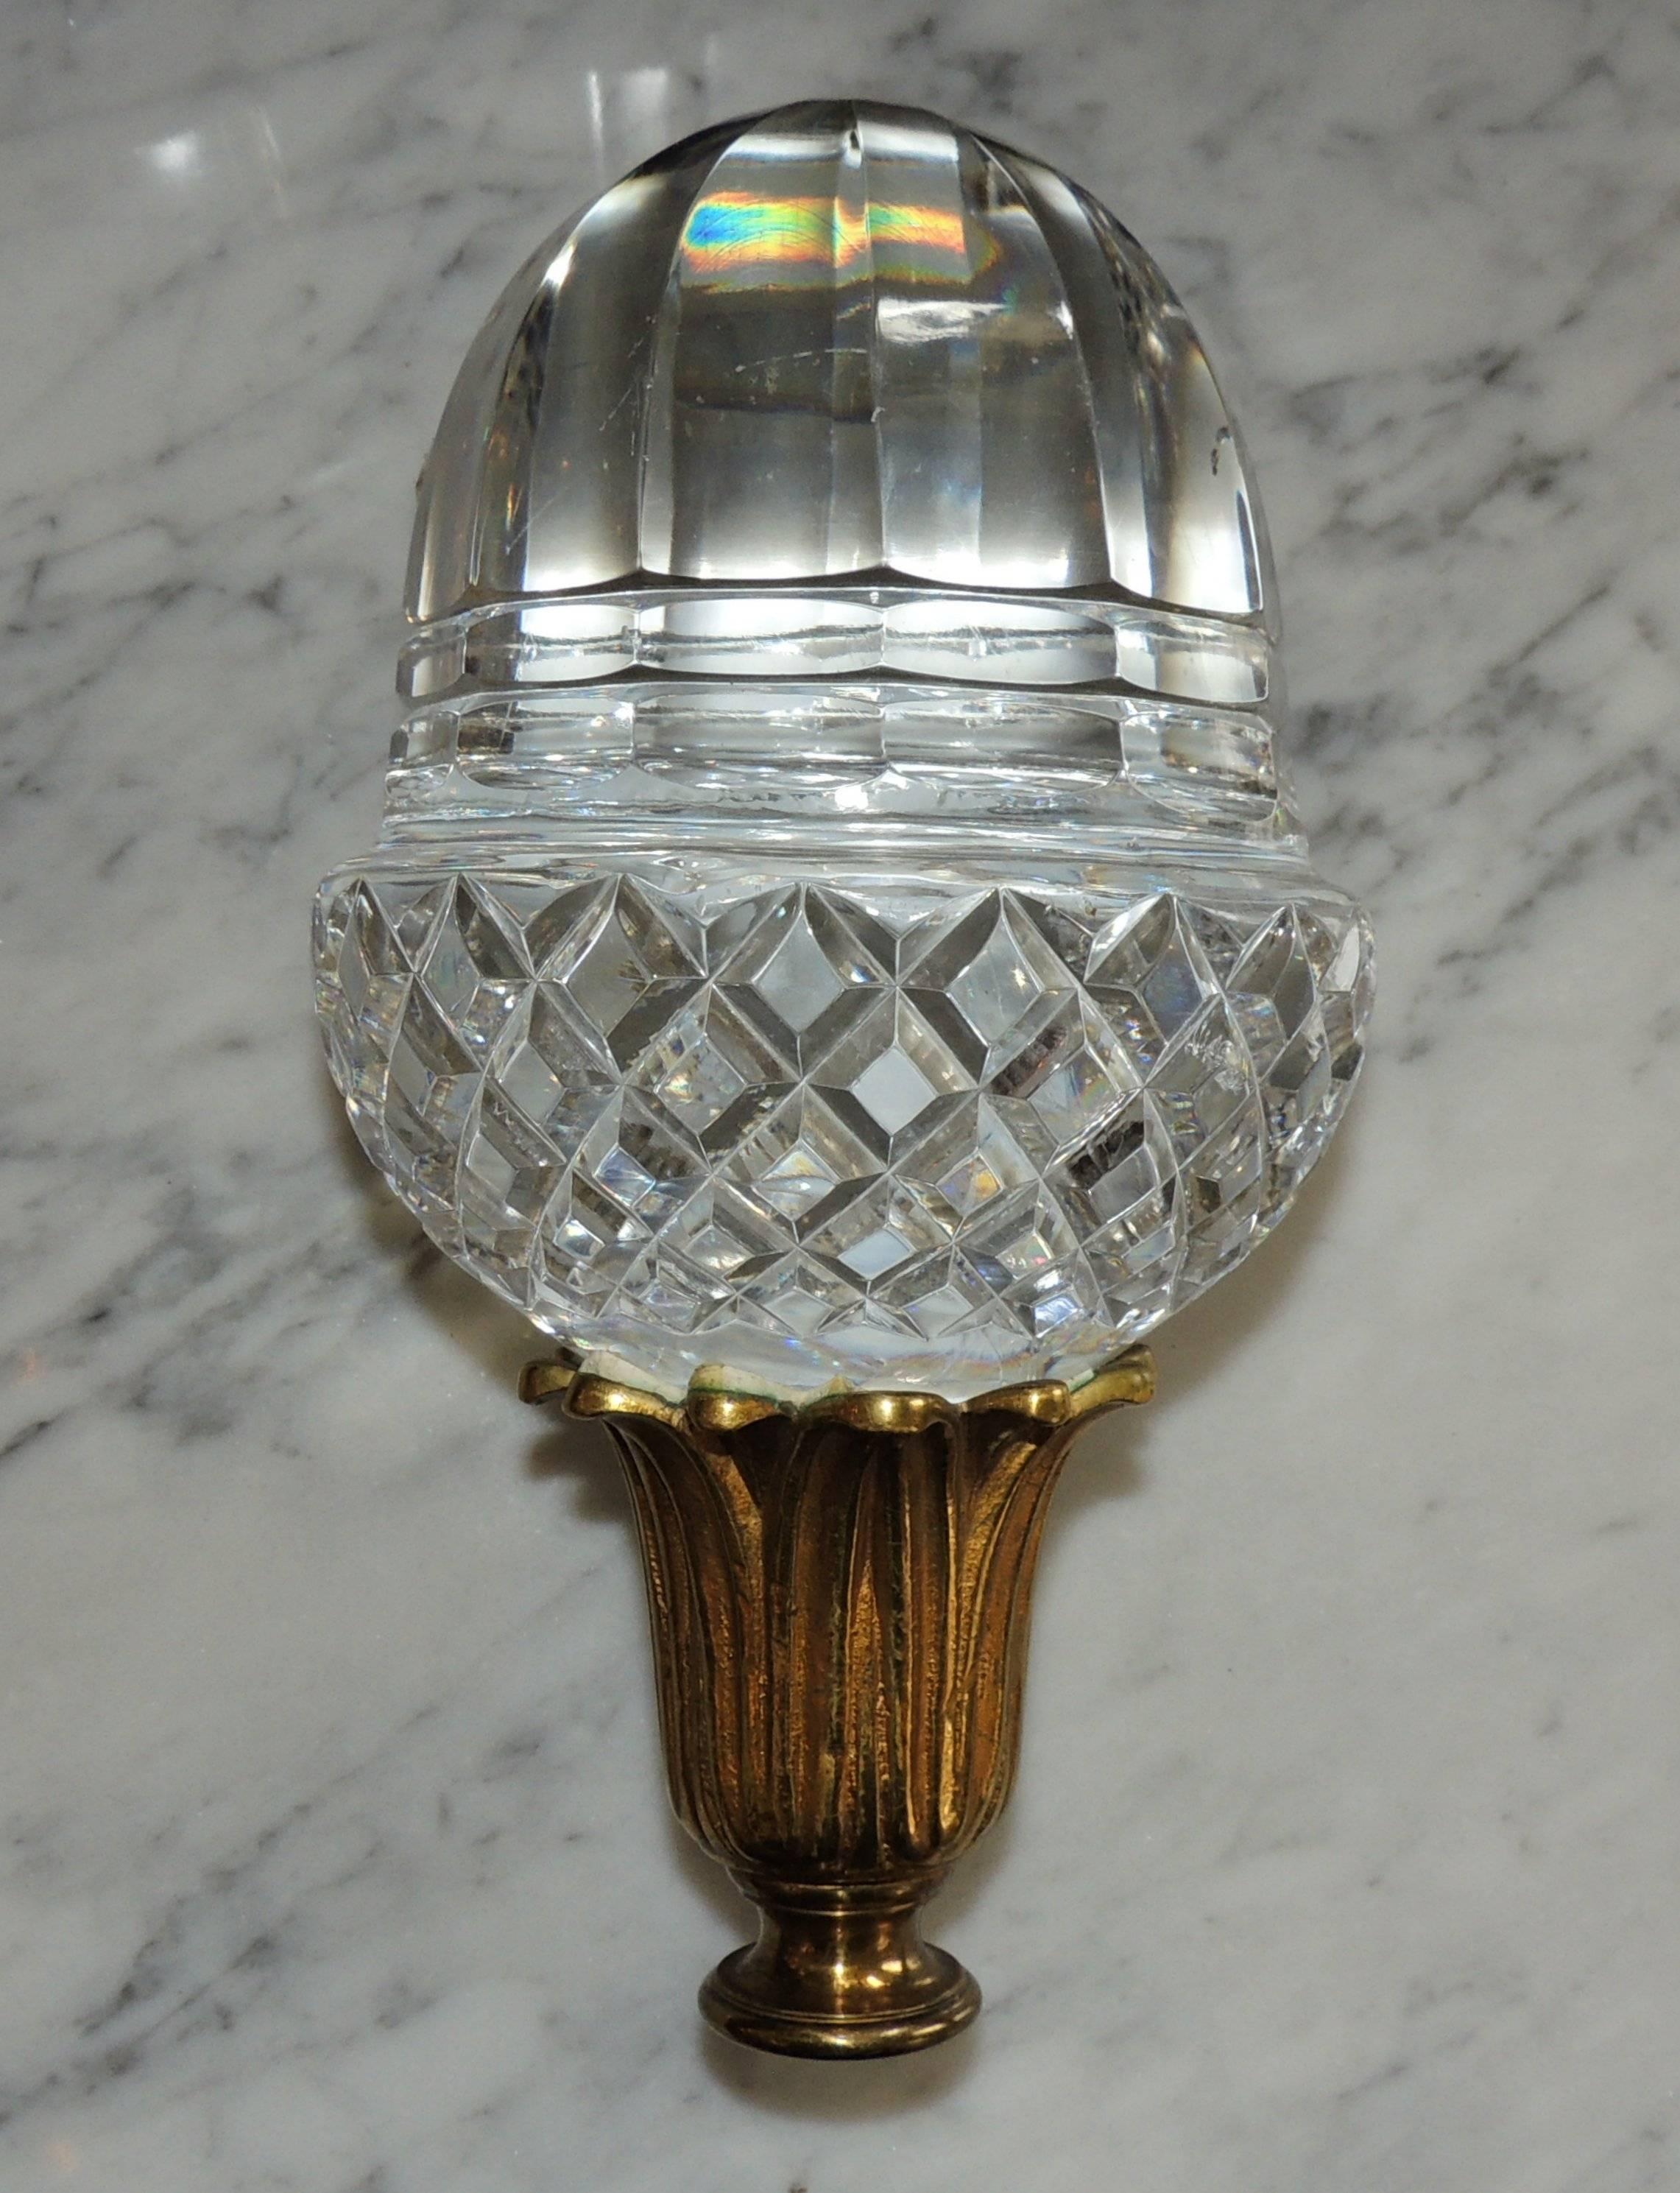 A wonderful antique crystal finial for the top of a banister cap or newell post on your staircase.

Cut crystal diamond pattern on the bottom, beveled edges and large clear crystal top. The bottom is a wonderful doré bronze leaf cup pattern. The